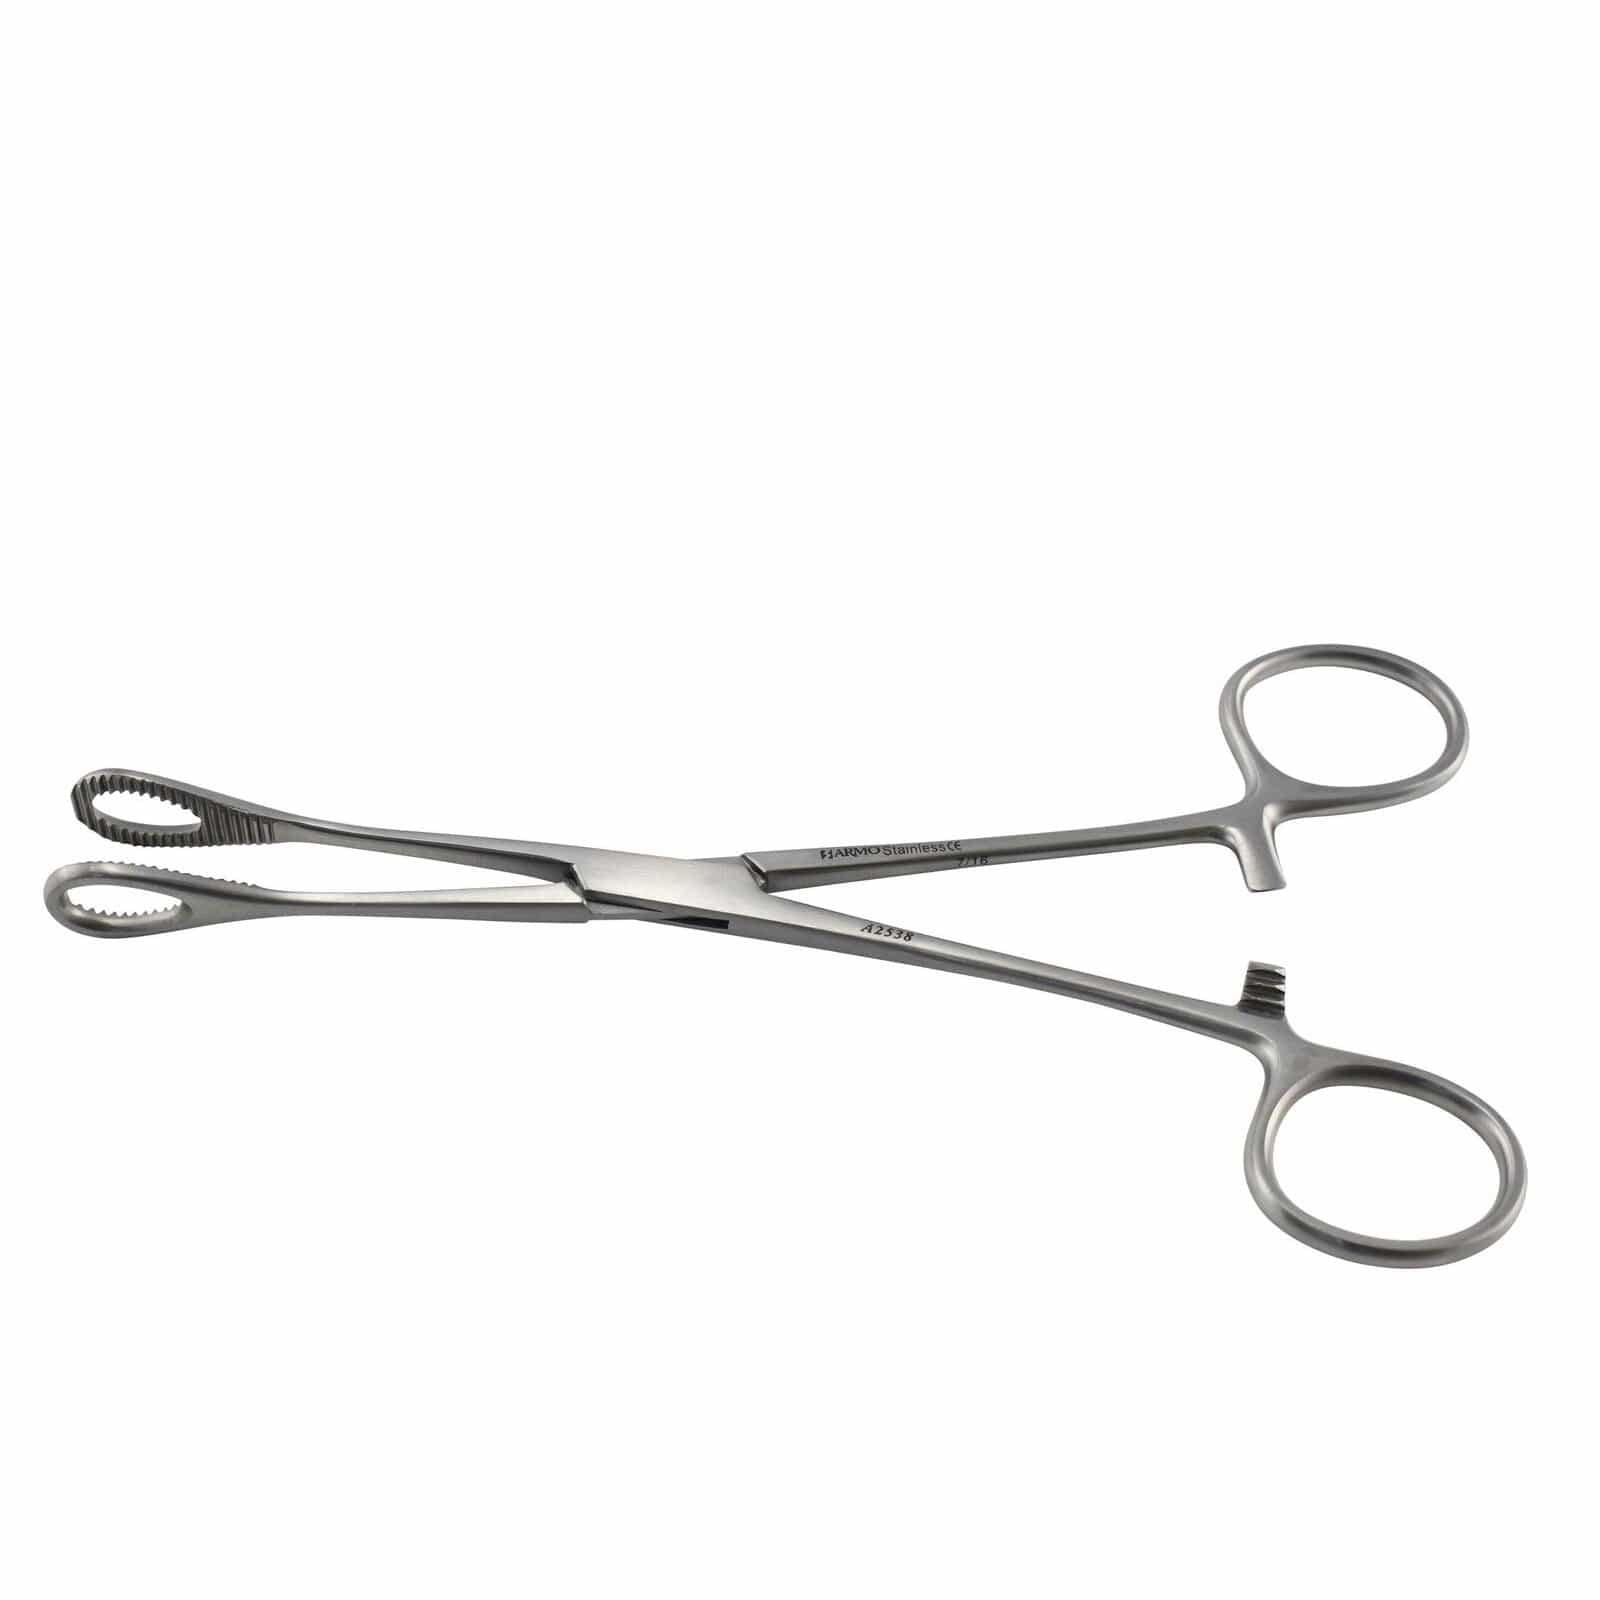 Armo Surgical Instruments 18cm Armo Foerster Forceps